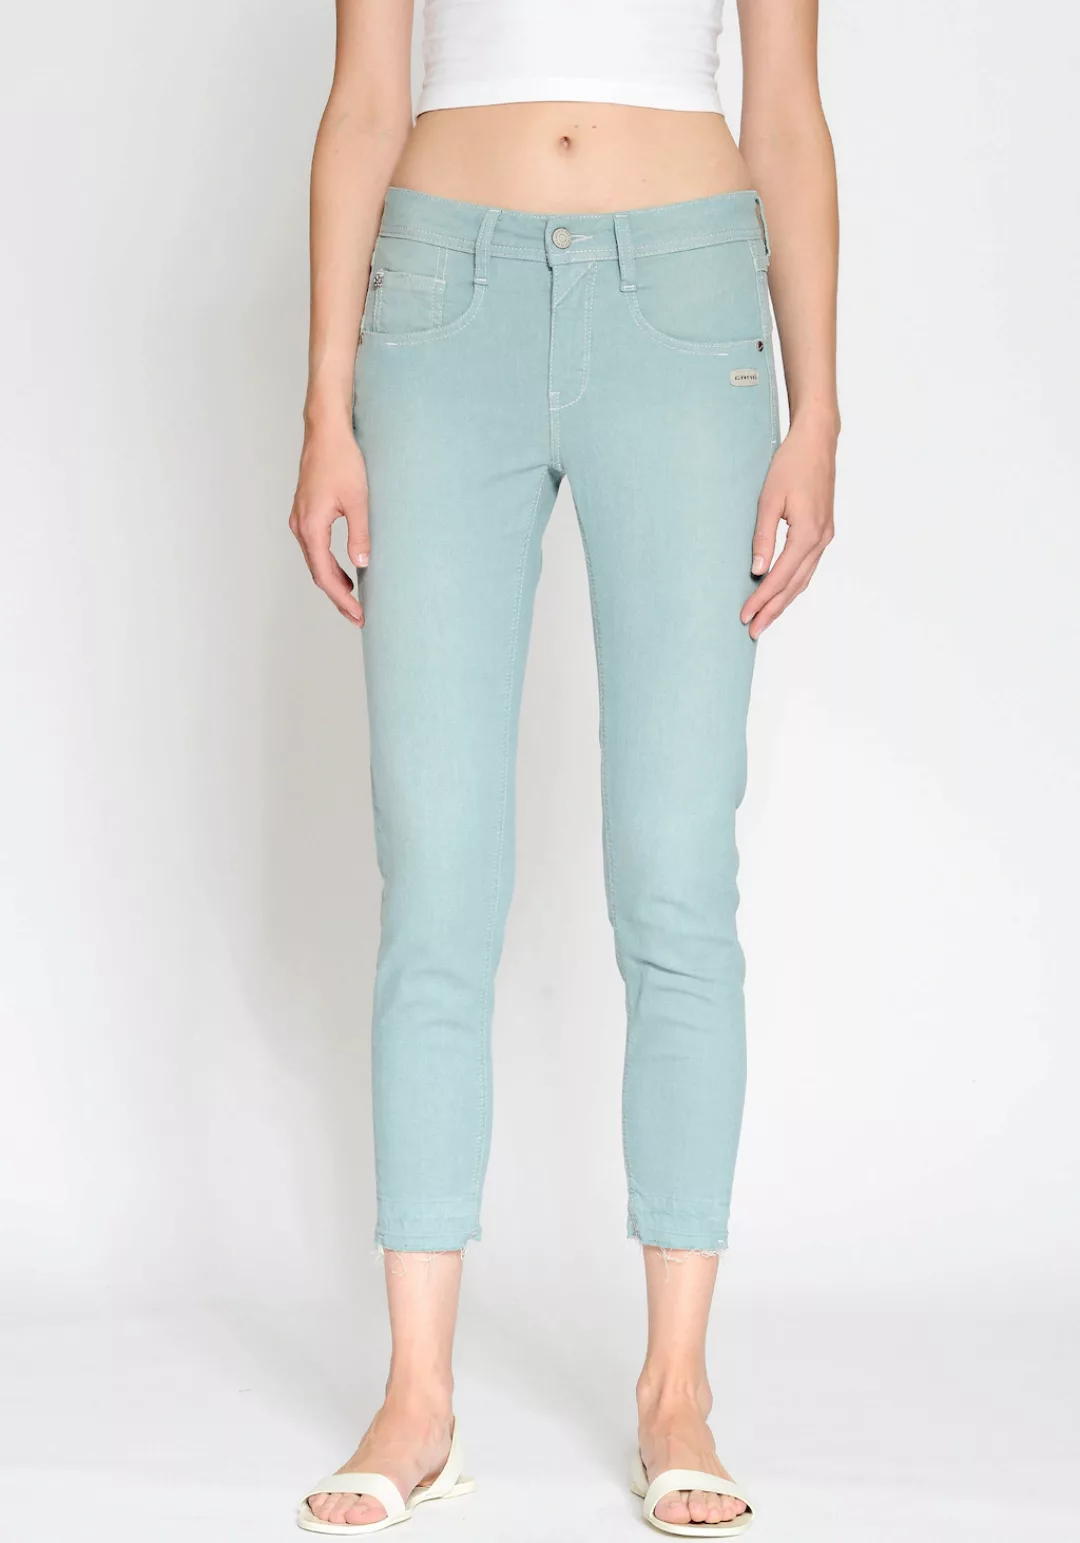 GANG Relax-fit-Jeans "94Amelie", CROPPED - Relaxed fit günstig online kaufen